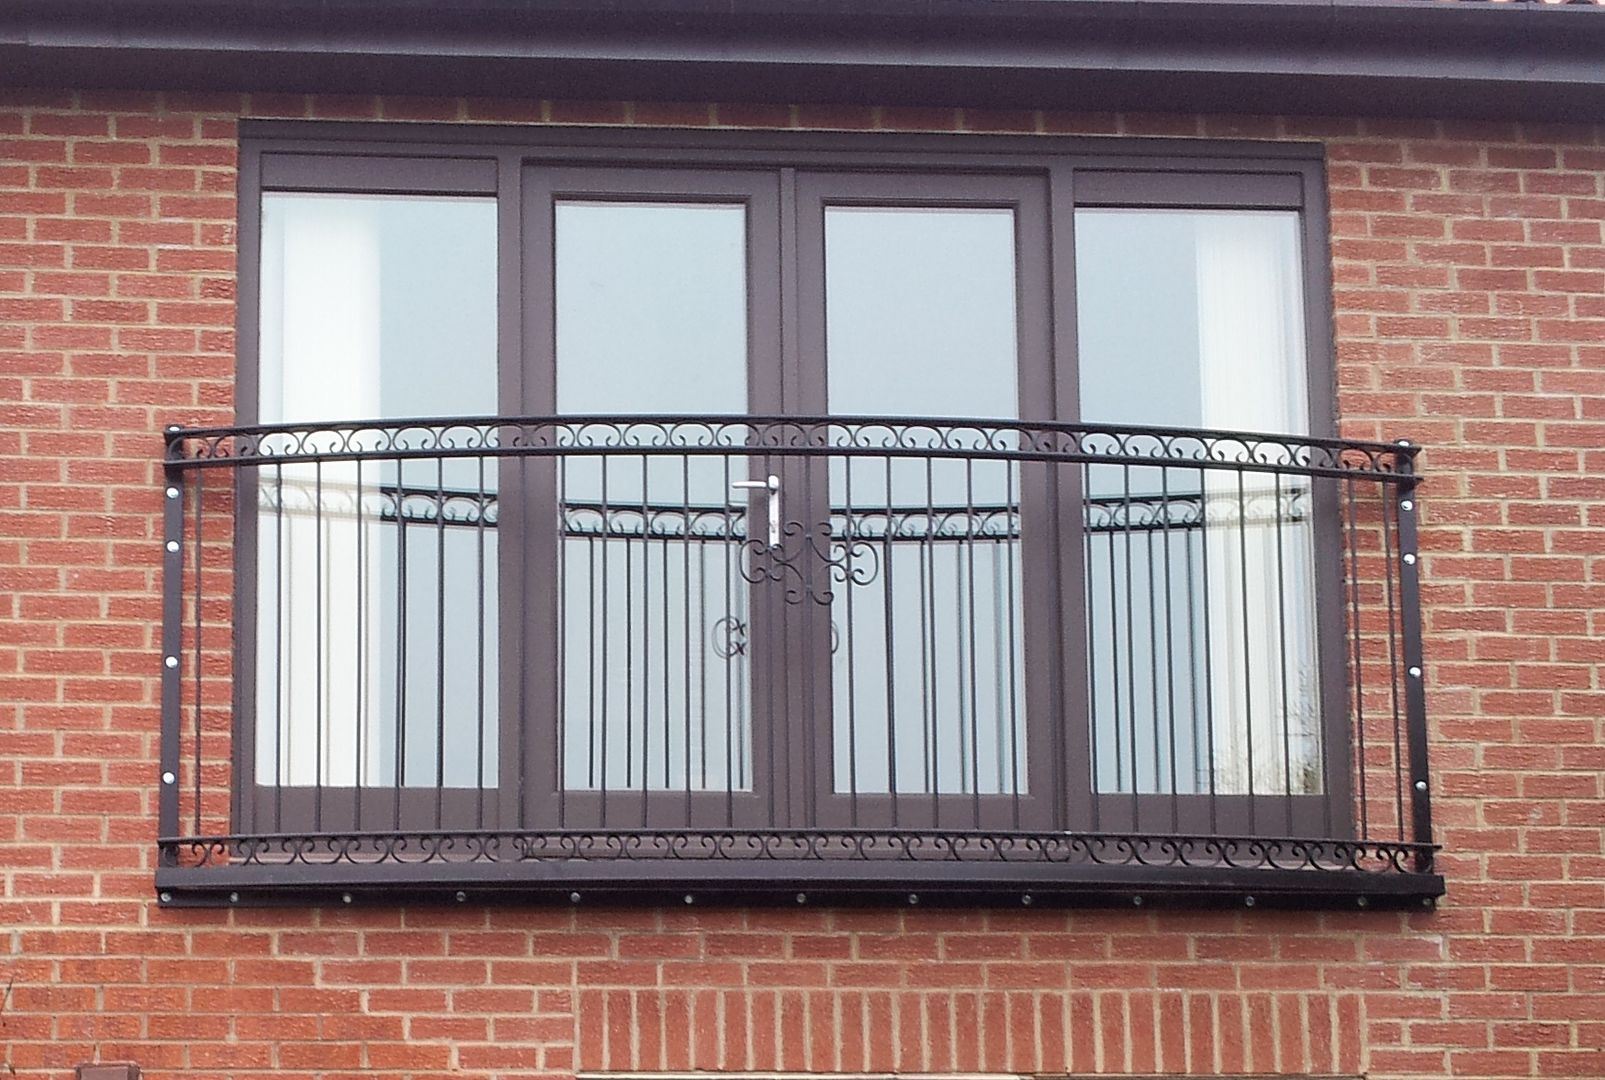 Curved juliet balcony balustrade designs and prices. Get a quote or buy online